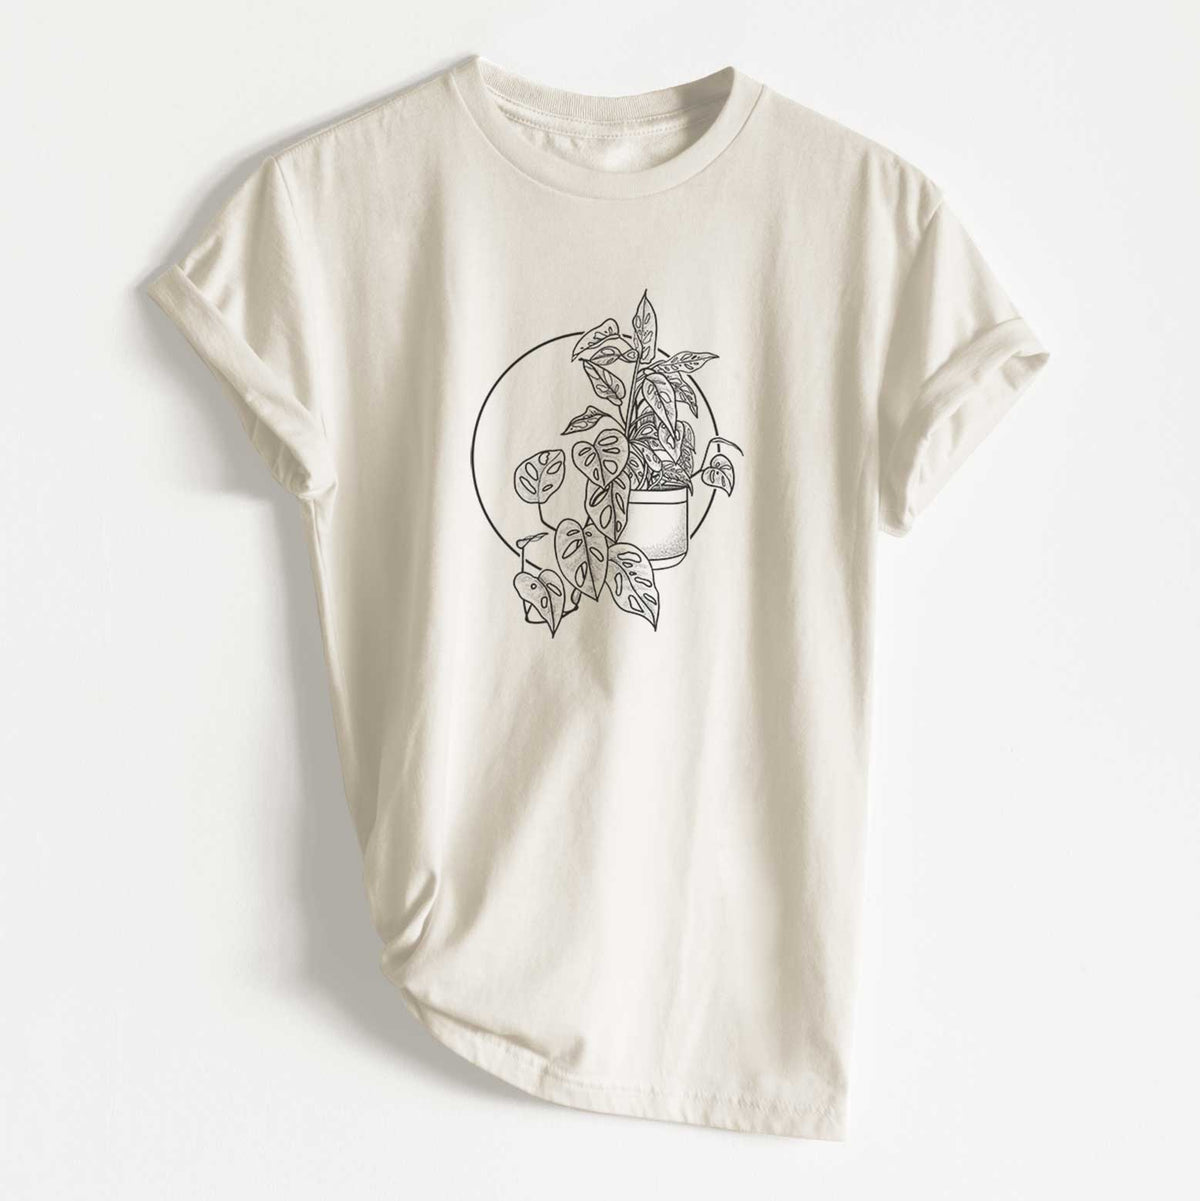 Monstera Adansonii - Unisex Recycled Eco Tee  - CLOSEOUT - FINAL SALE